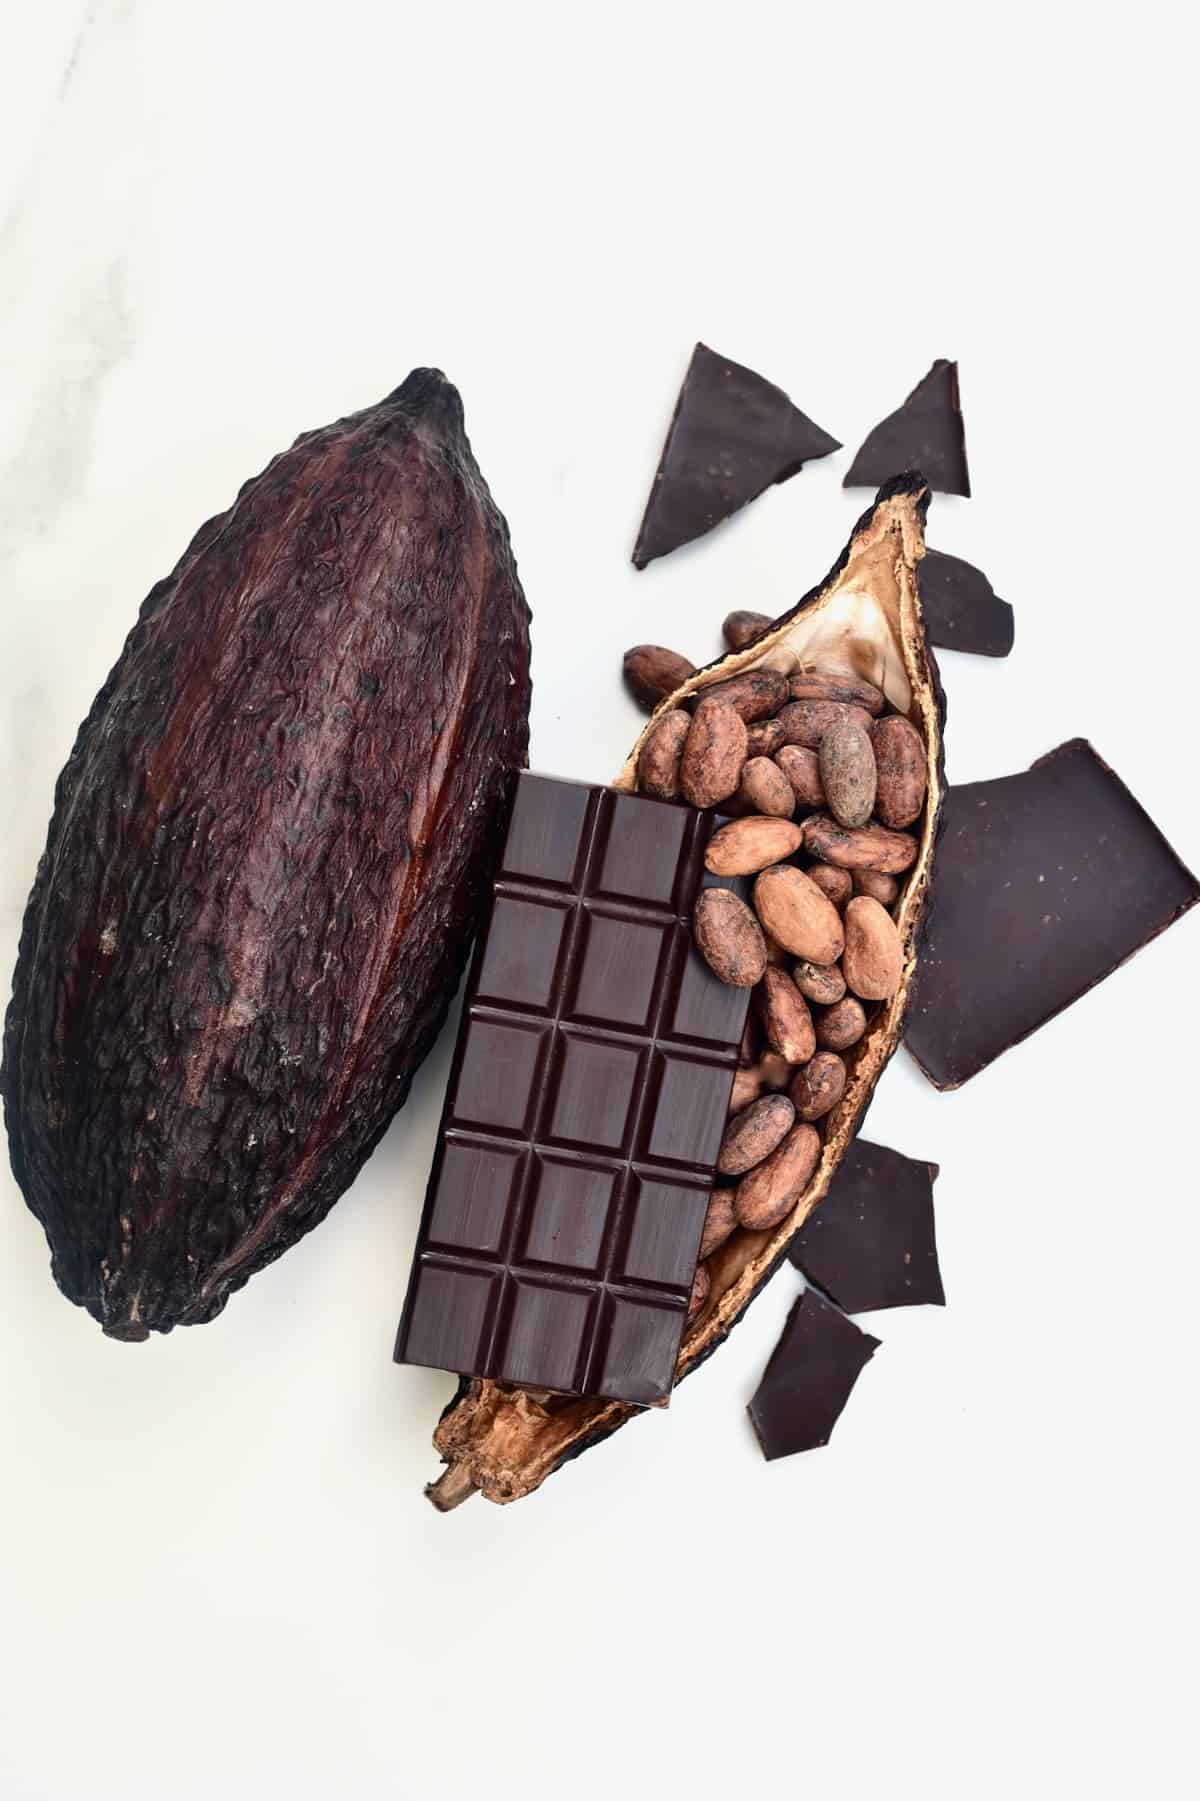 Arguments For Getting Rid Of cocoa beans